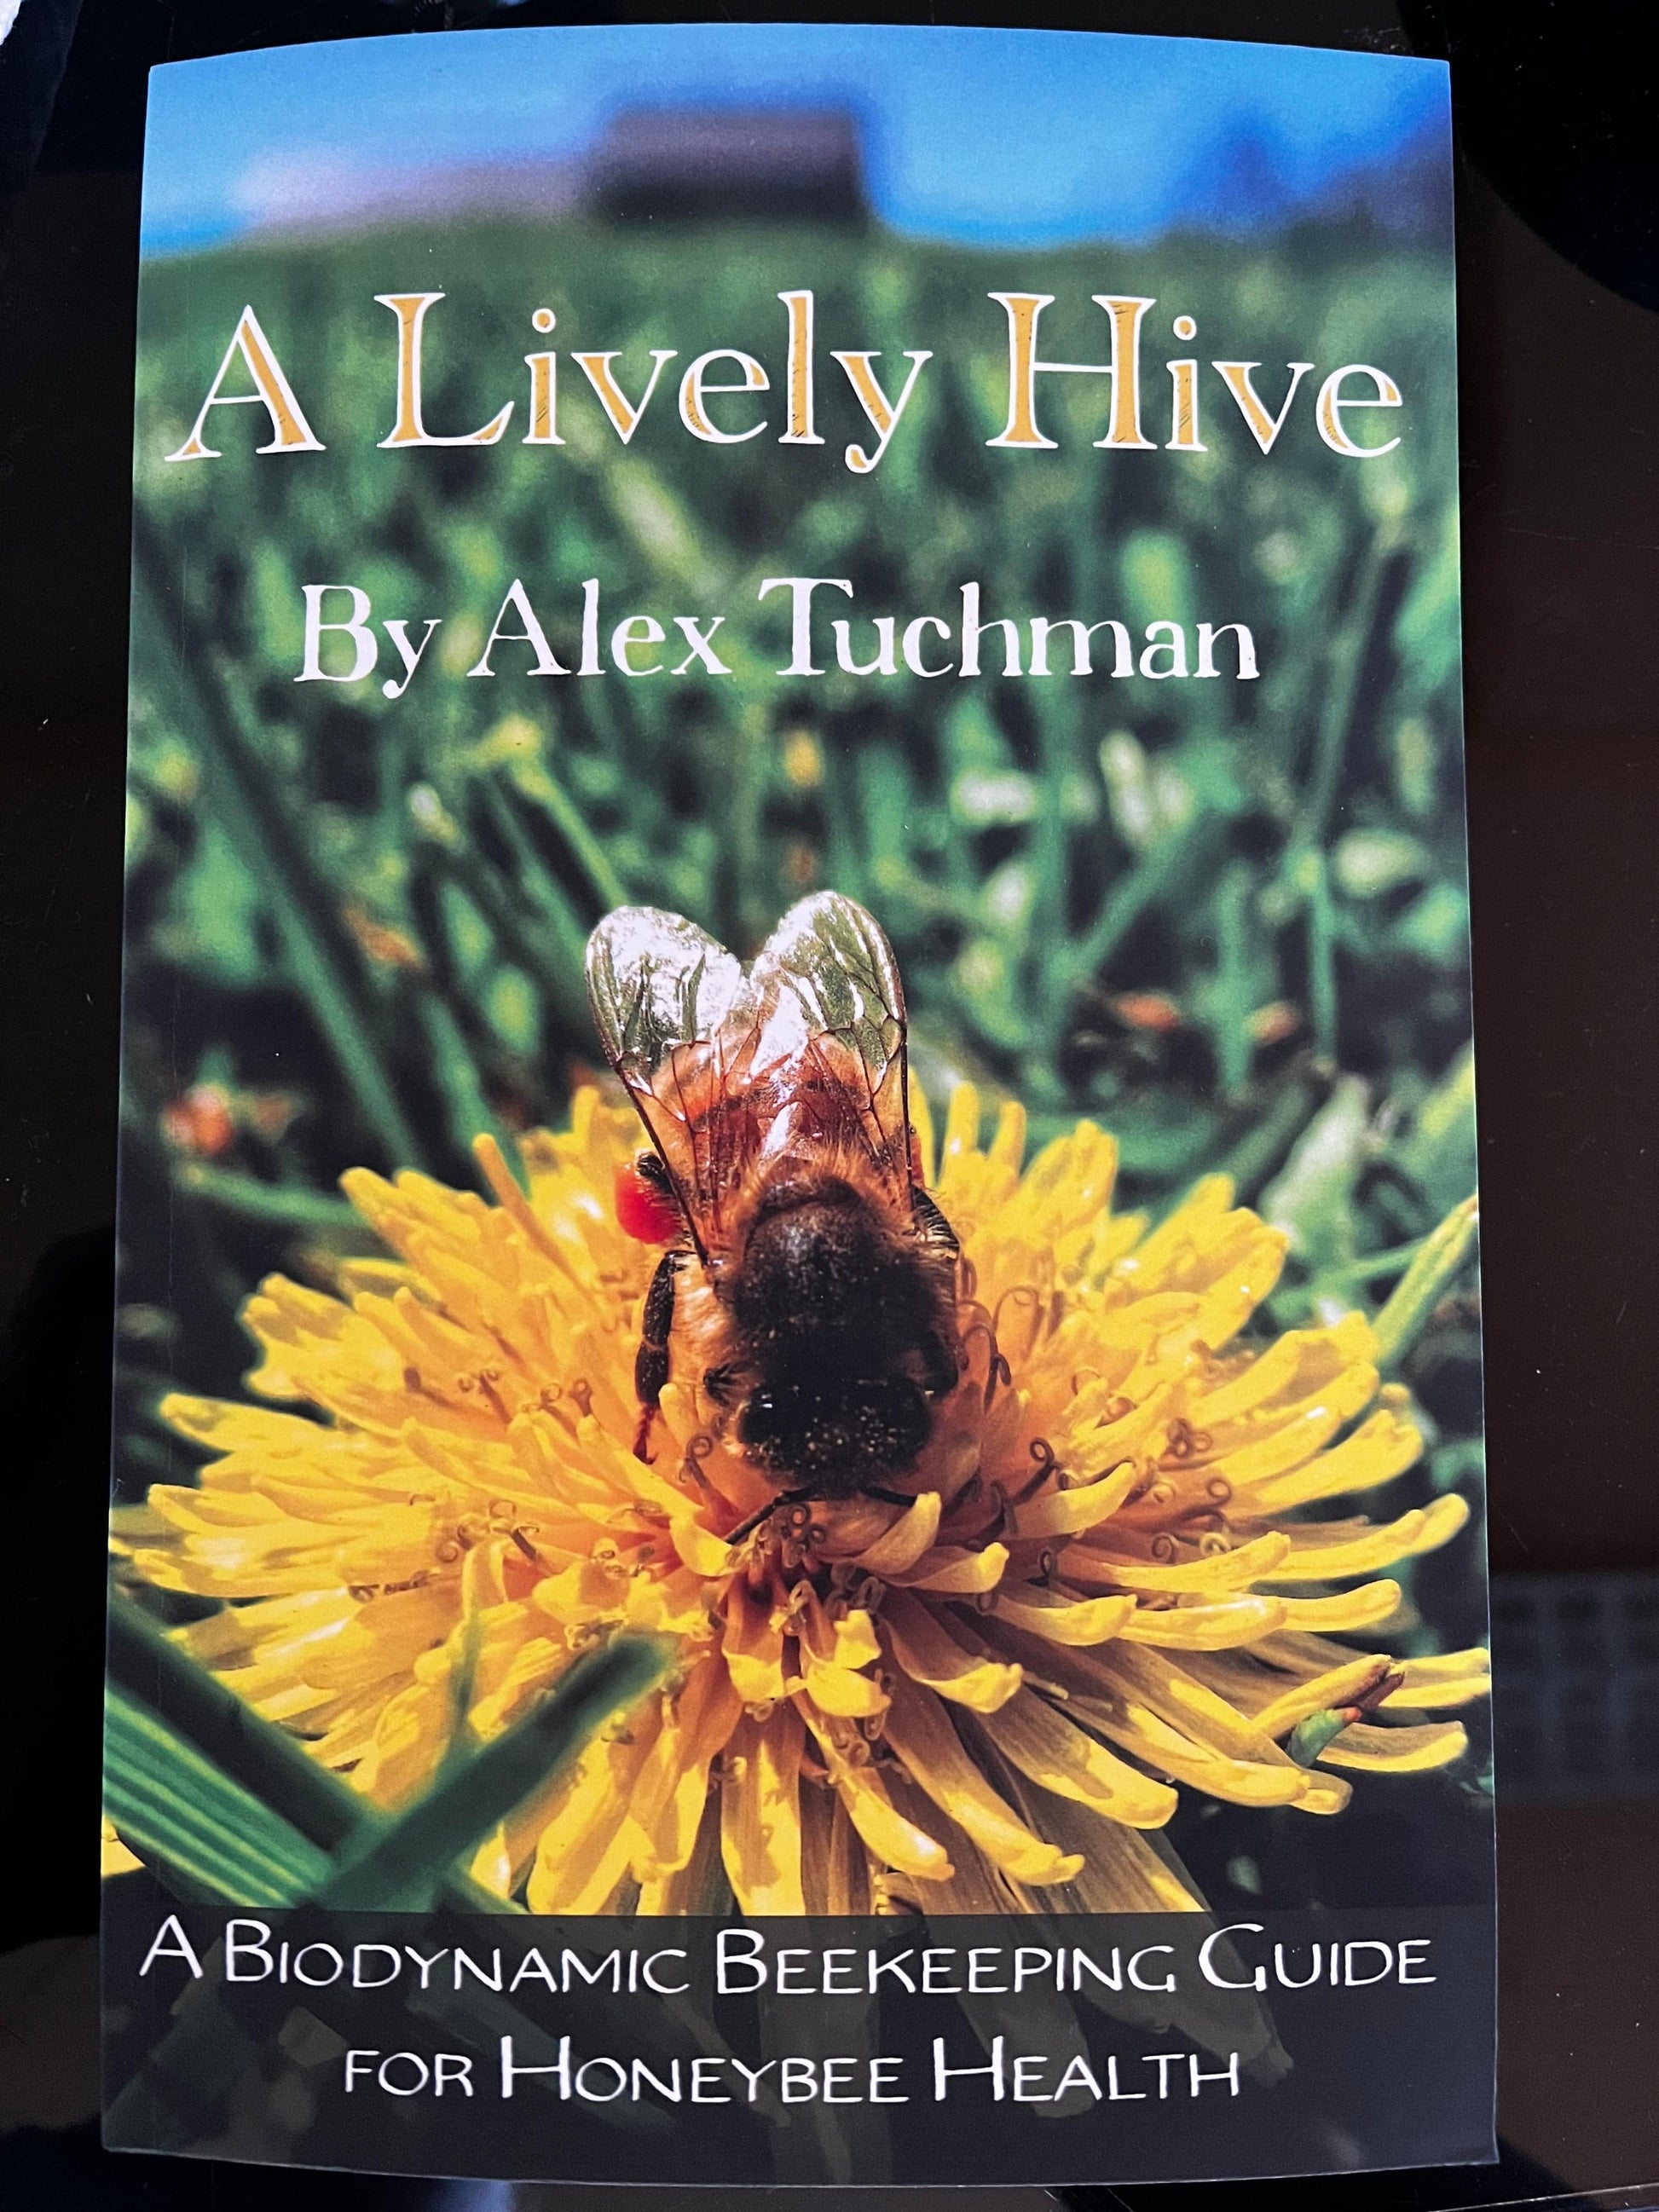 A Lively Hive by Alex Tuchman - The Josephine Porter Institute